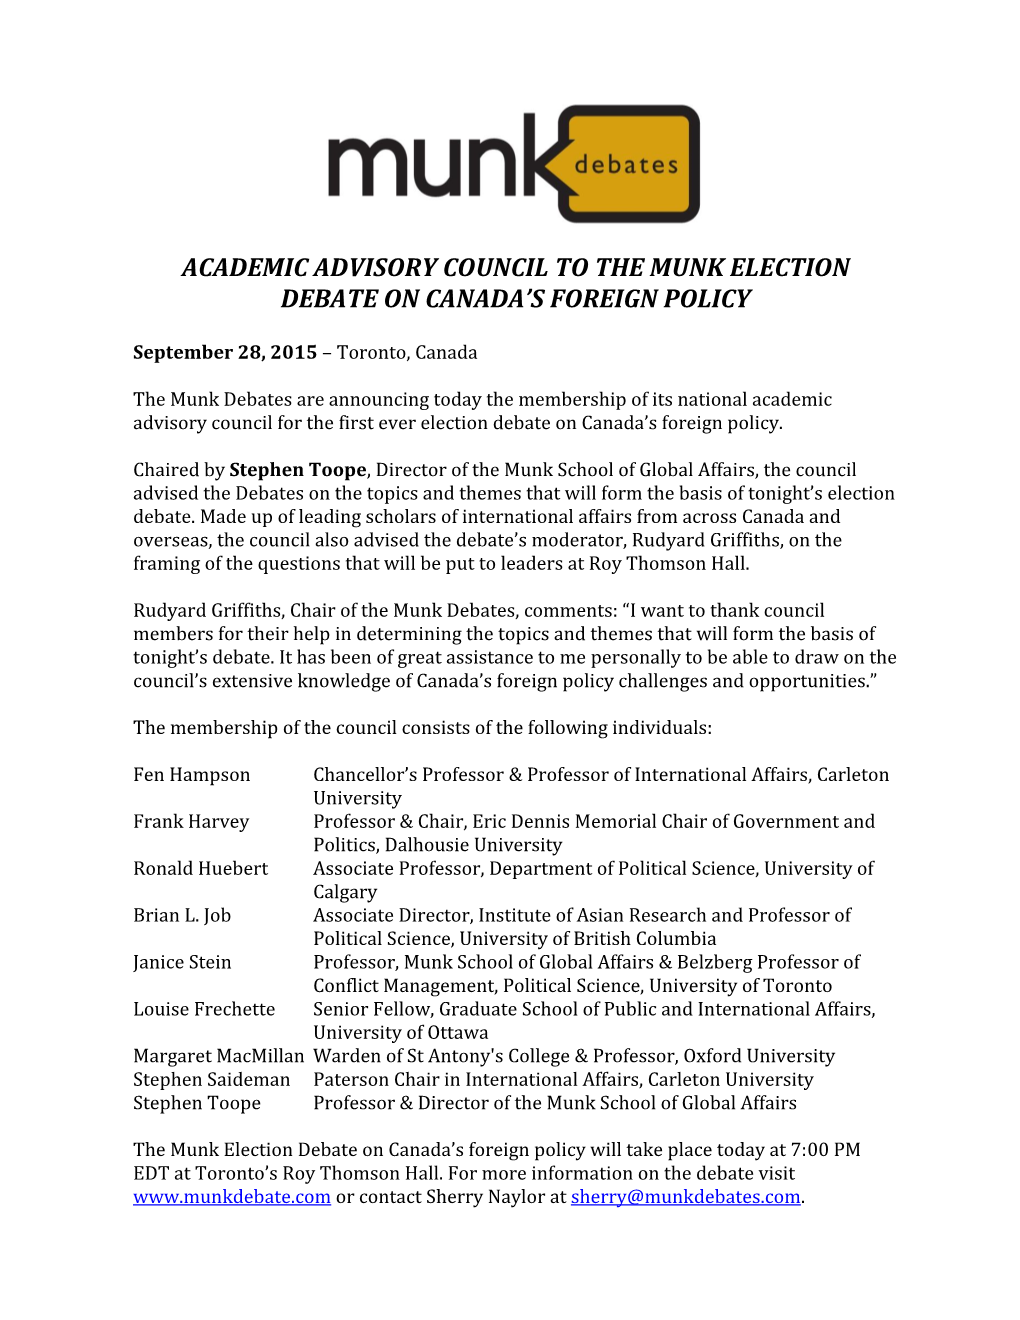 Academic Advisory Council to the Munk Election Debate on Canada's